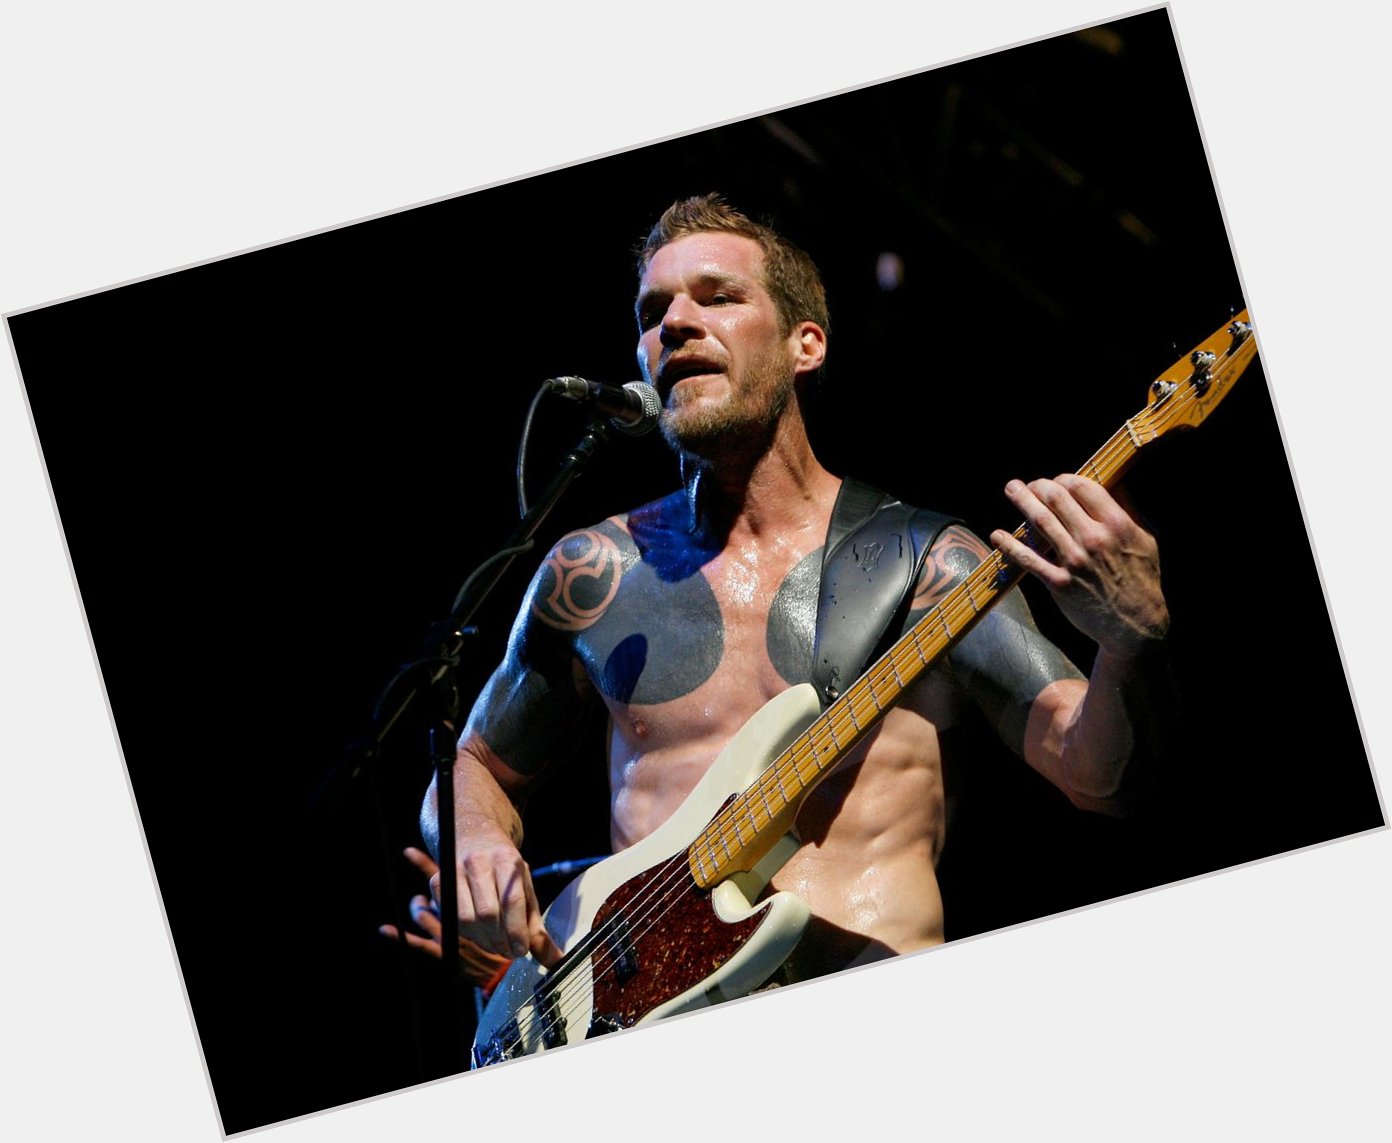 Happy 47th birthday to Tim Commerford of Rage Against The Machine, Audioslave, & 